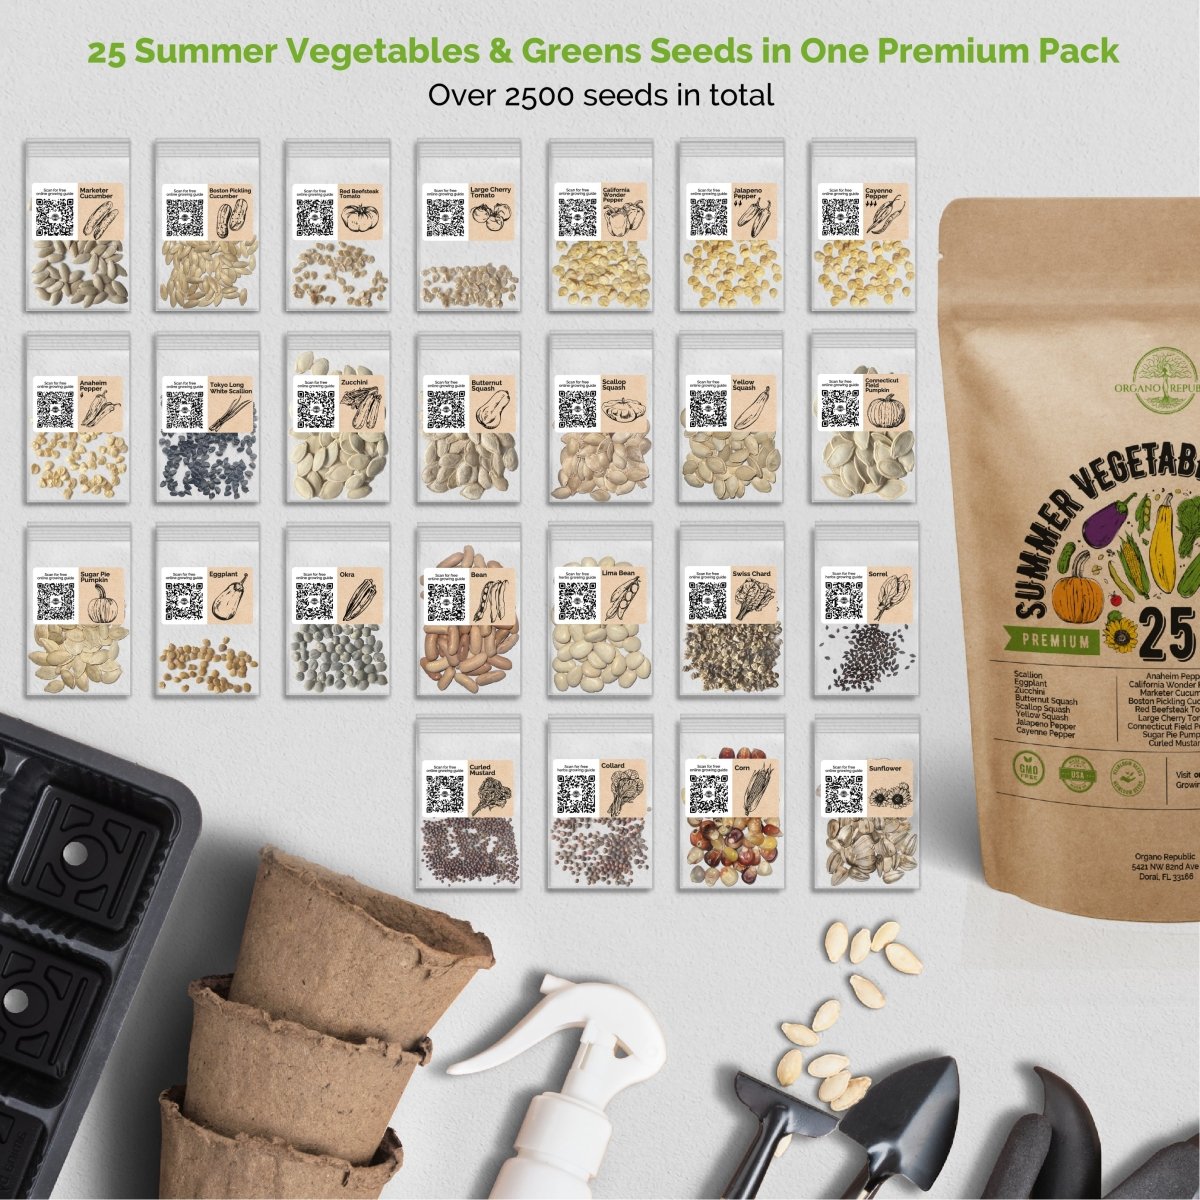 25 Summer Vegetables and 15 Medicinal & Tea Herb Seeds Variety Packs Bundle Non-GMO Heirloom Seeds for Planting Indoor and Outdoor Over 6100 Herbs & Vegetables Seeds in One Value Bundle - Organo Republic